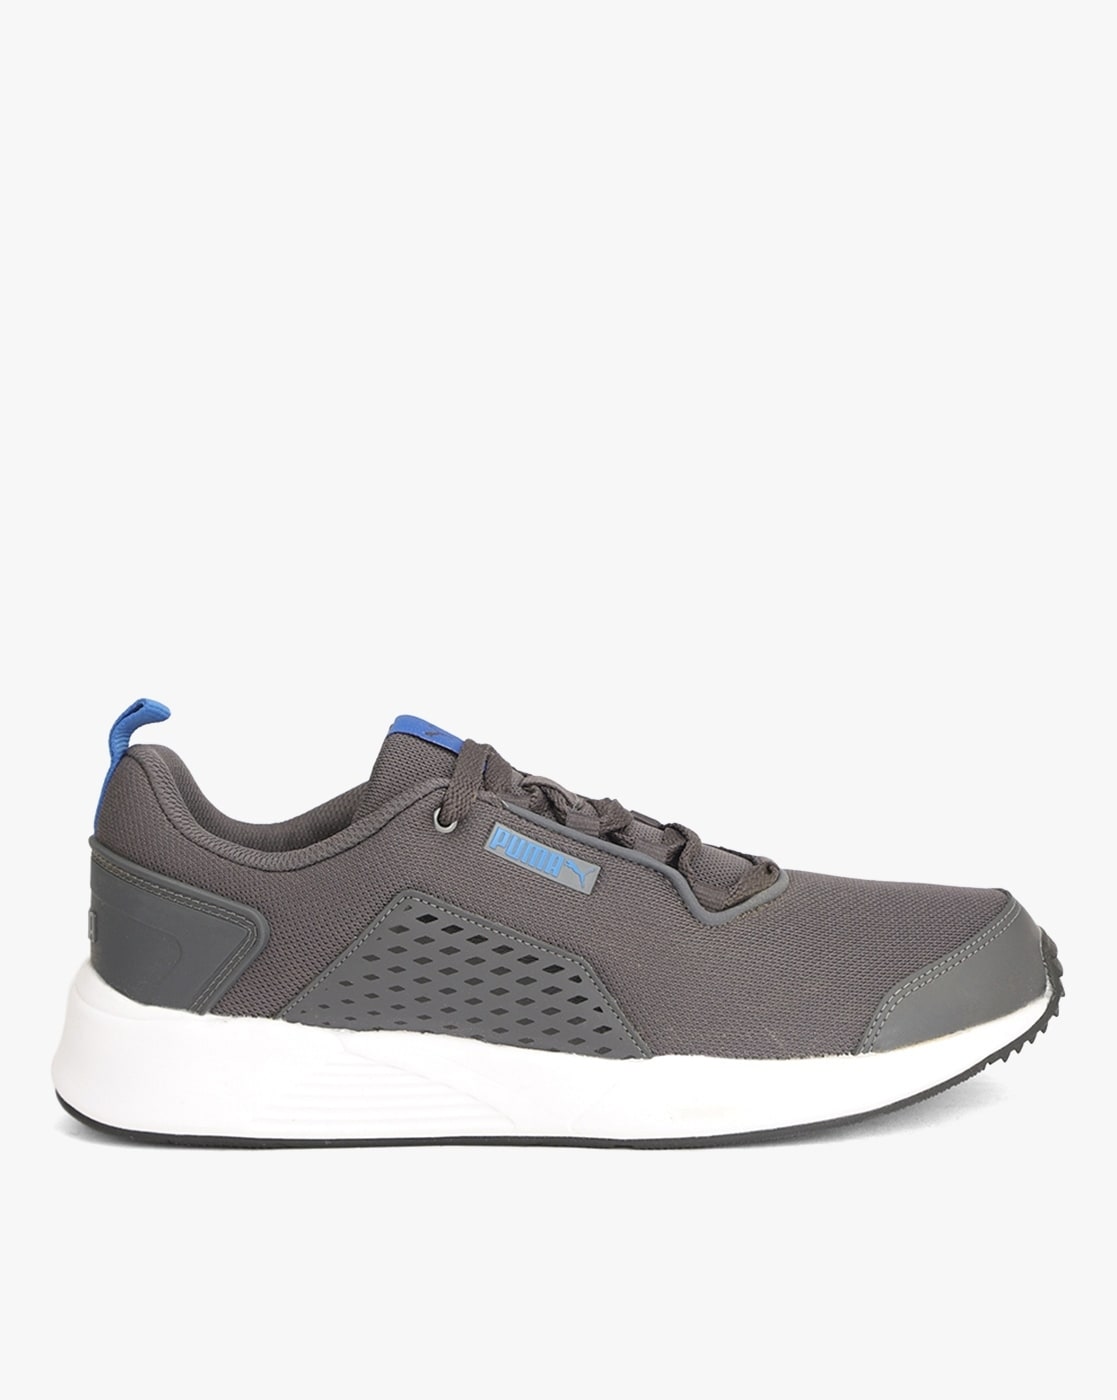 Puma Hip Hop 6 IDP Sneakers | Blue| 10 in Bangalore at best price by  Buyhatke - Justdial